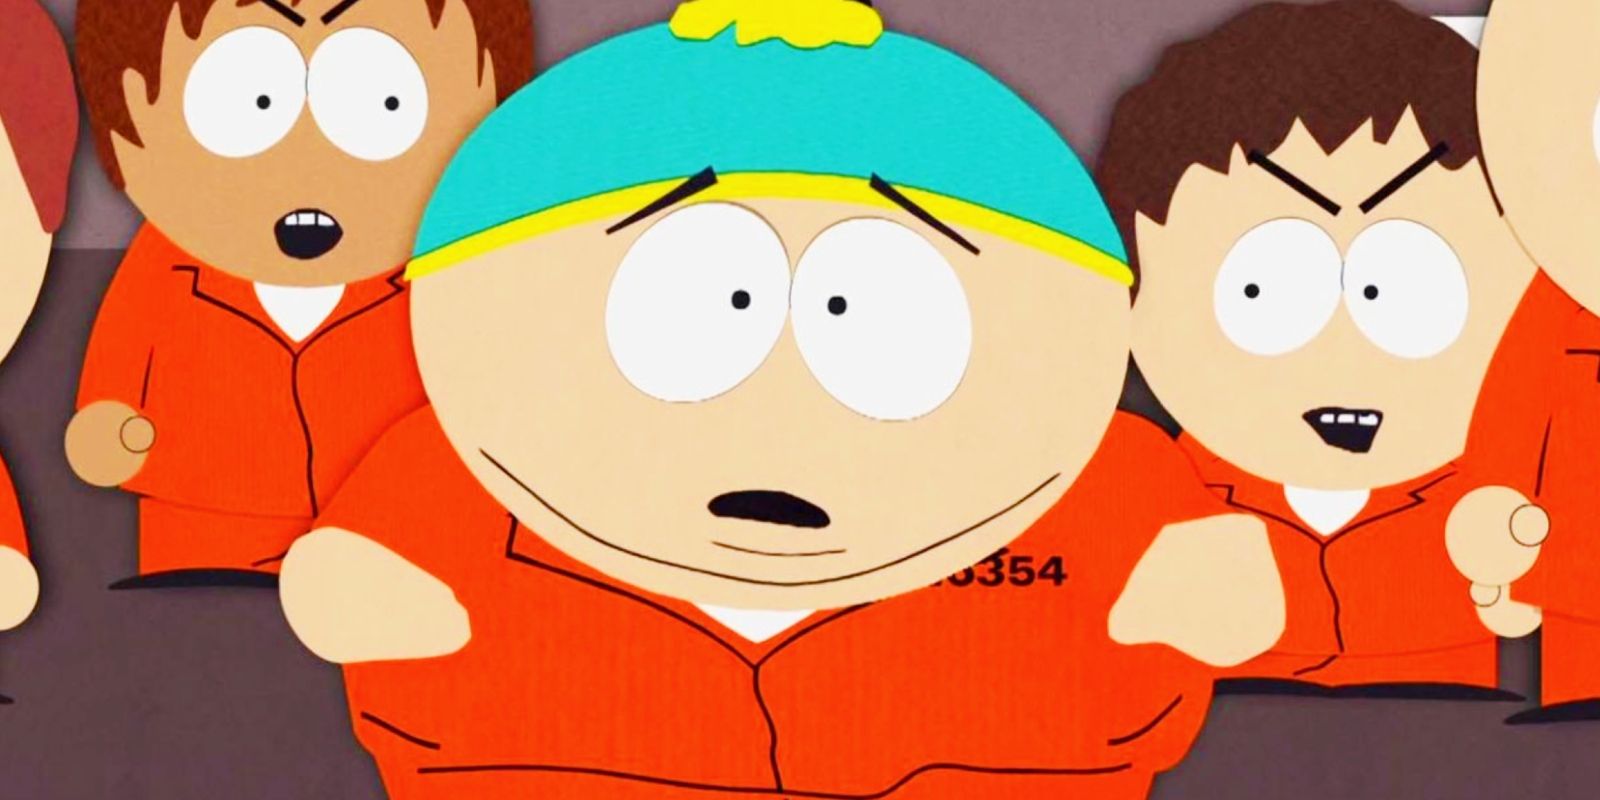 Cartman wearing a prison uniform and looking surprised in South Park